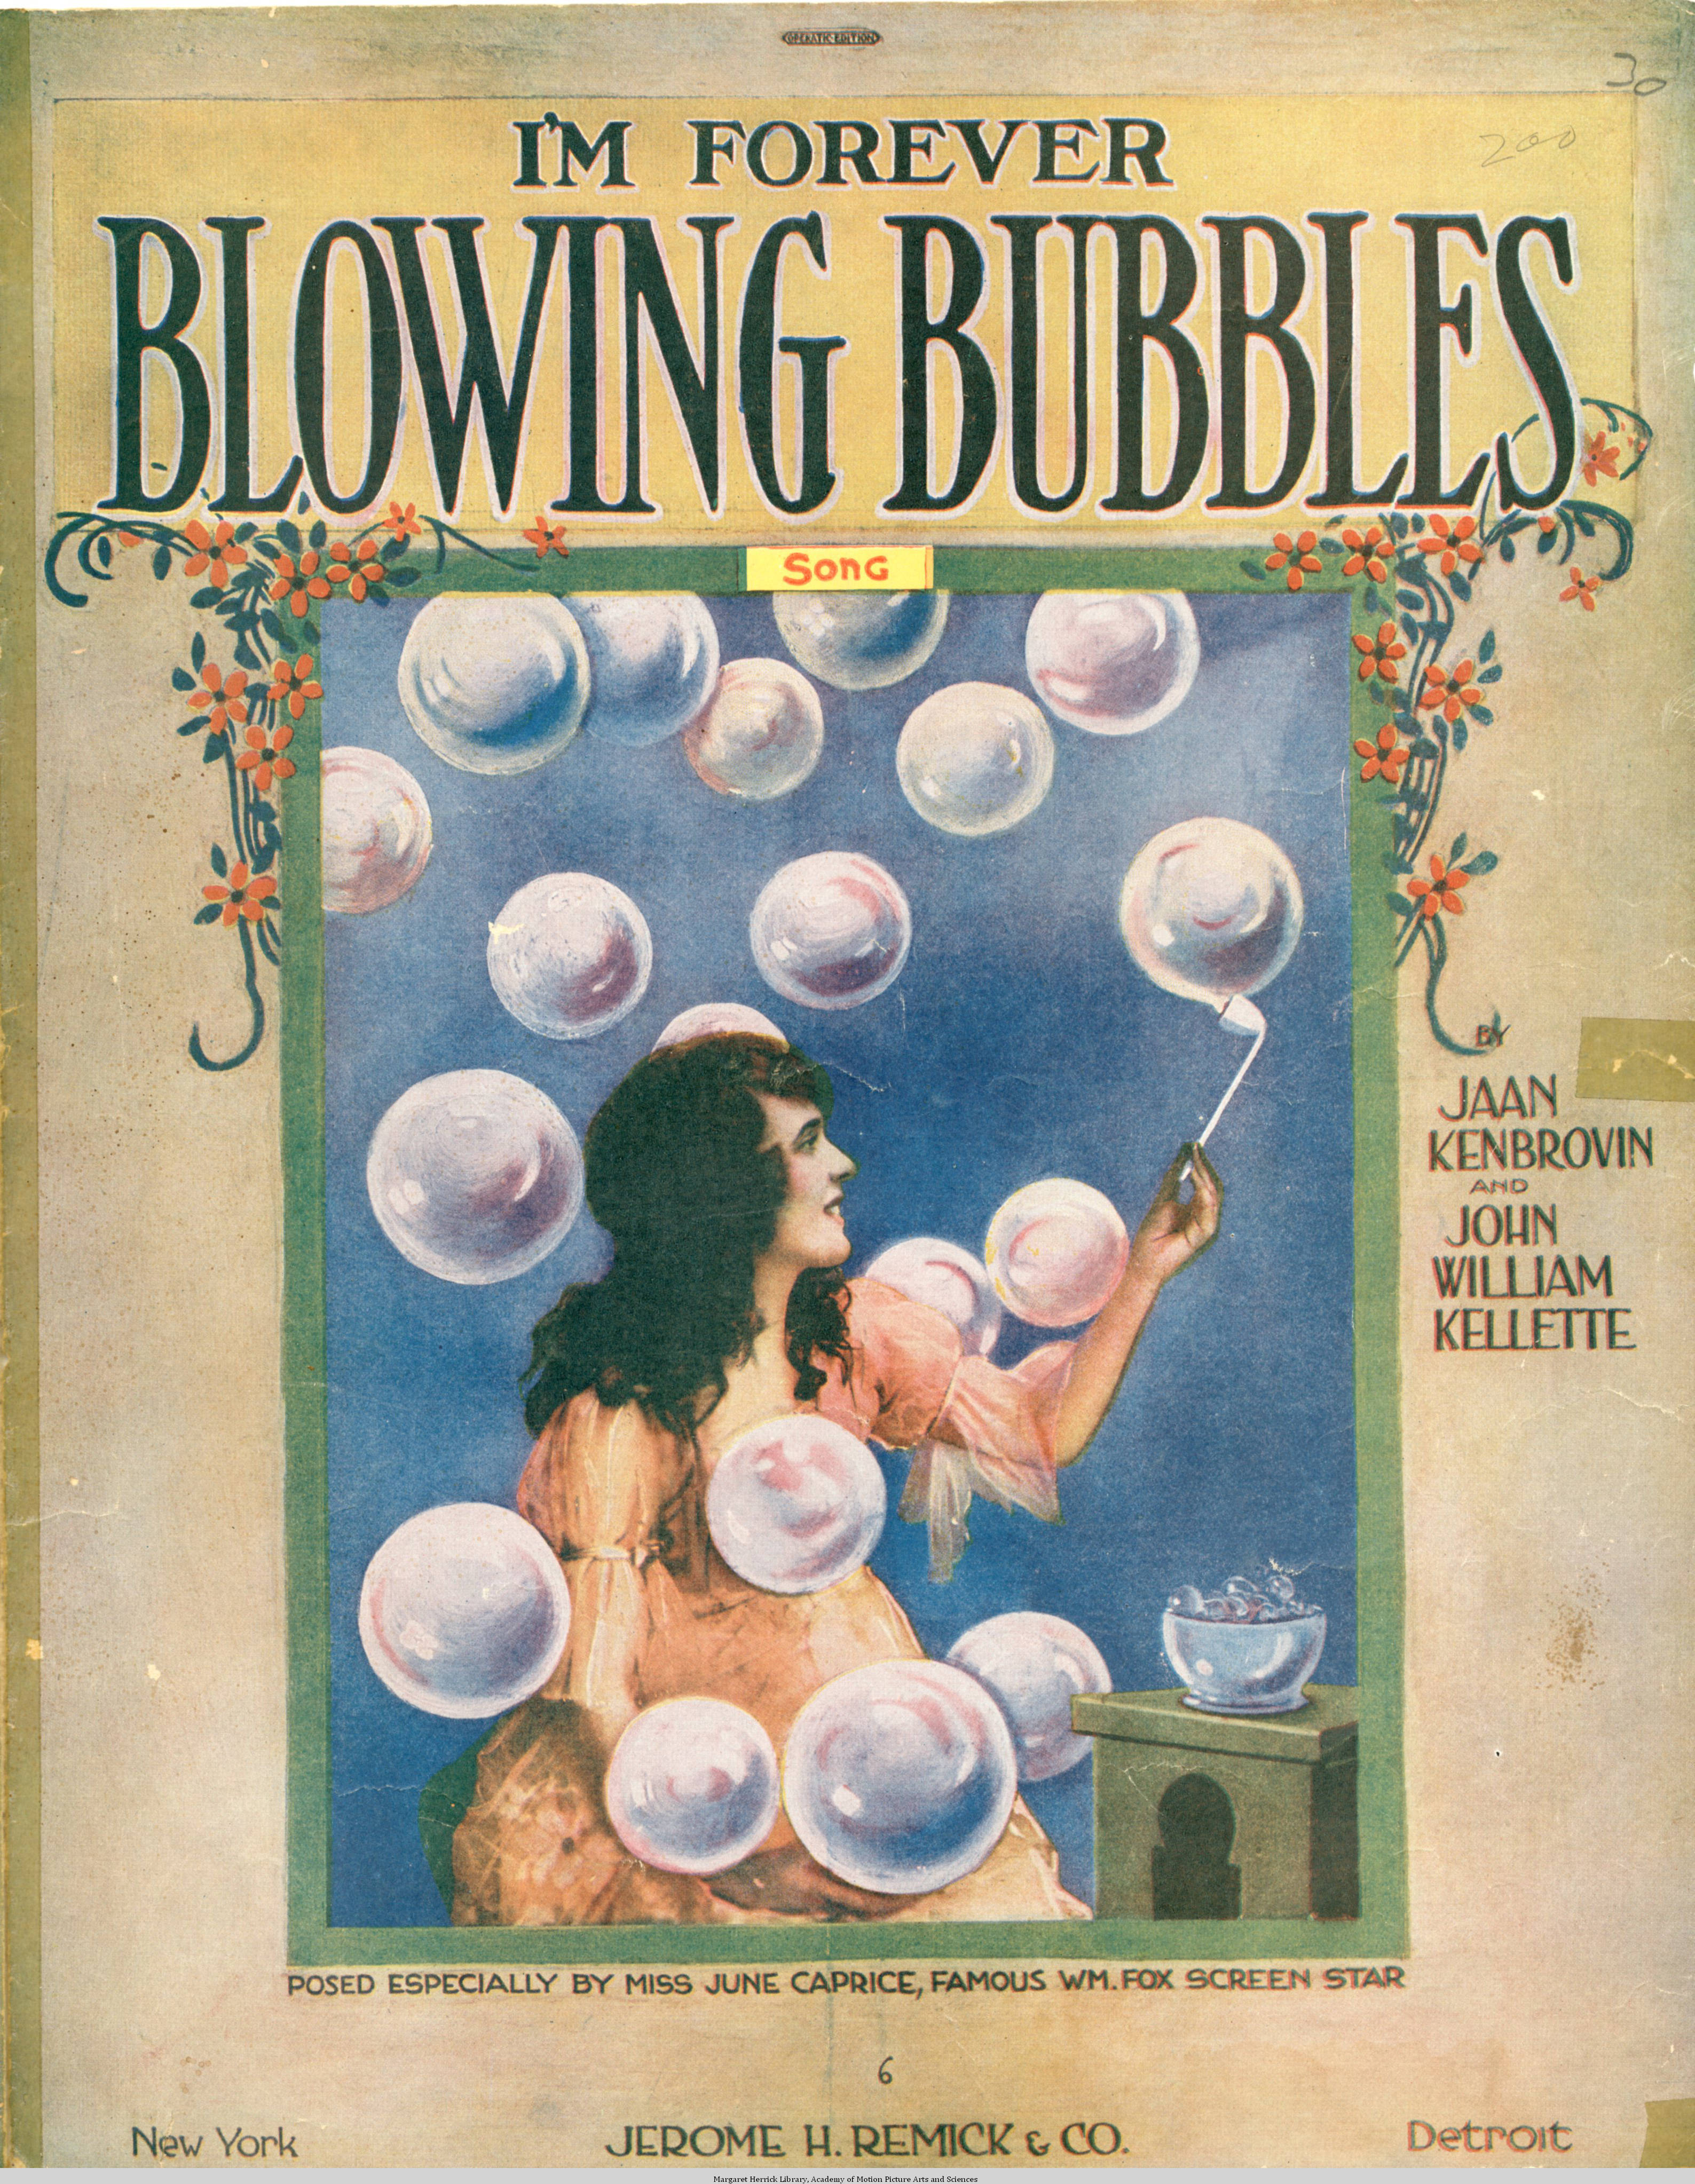 Sheet music cover - I'M FOREVER BLOWING BUBBLES - SONG (1919) (variant)